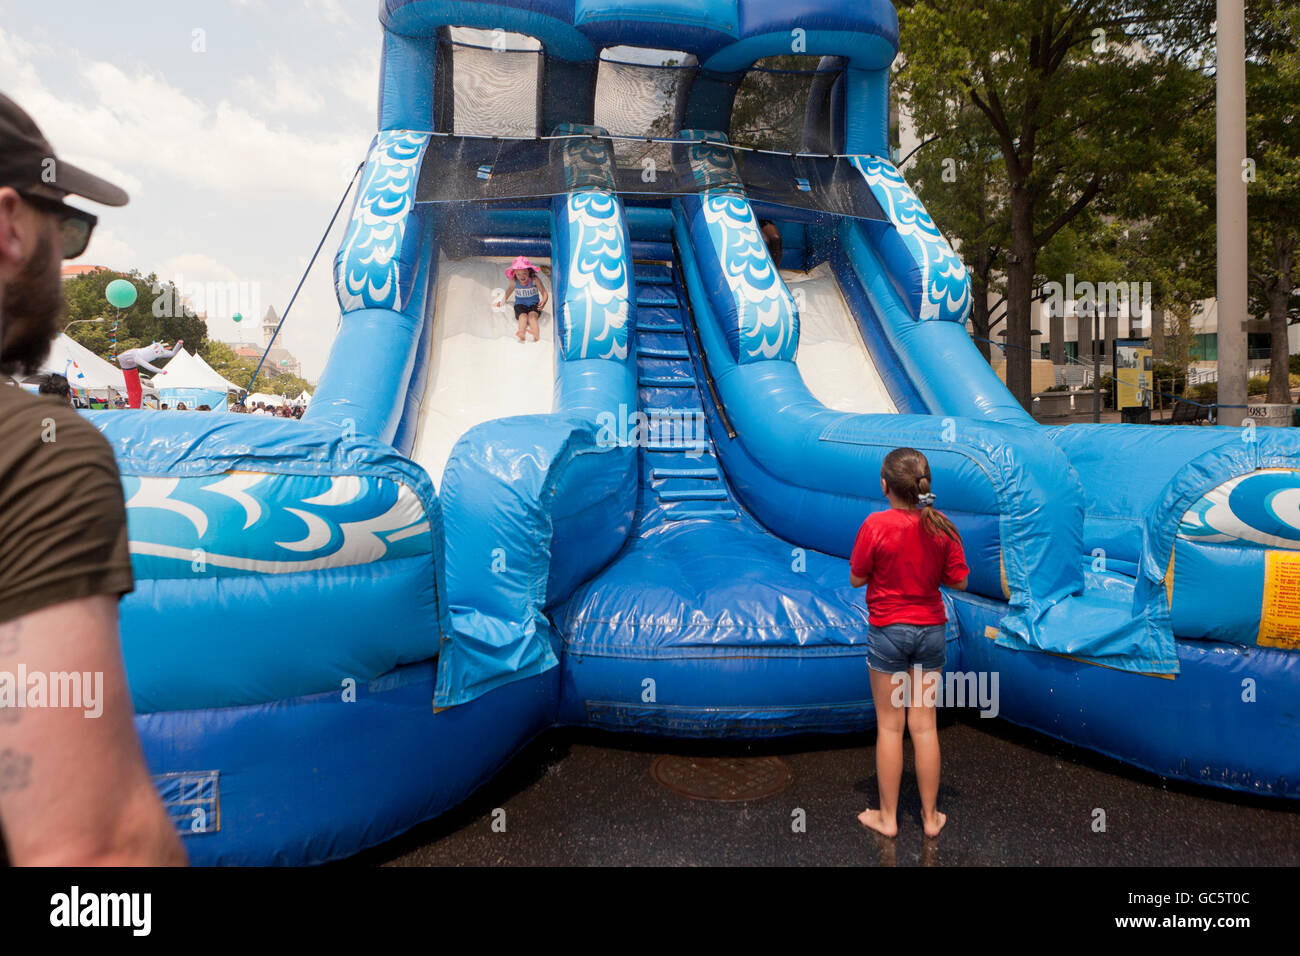 Inflatable water slide at an outdoor event - USA Stock Photo